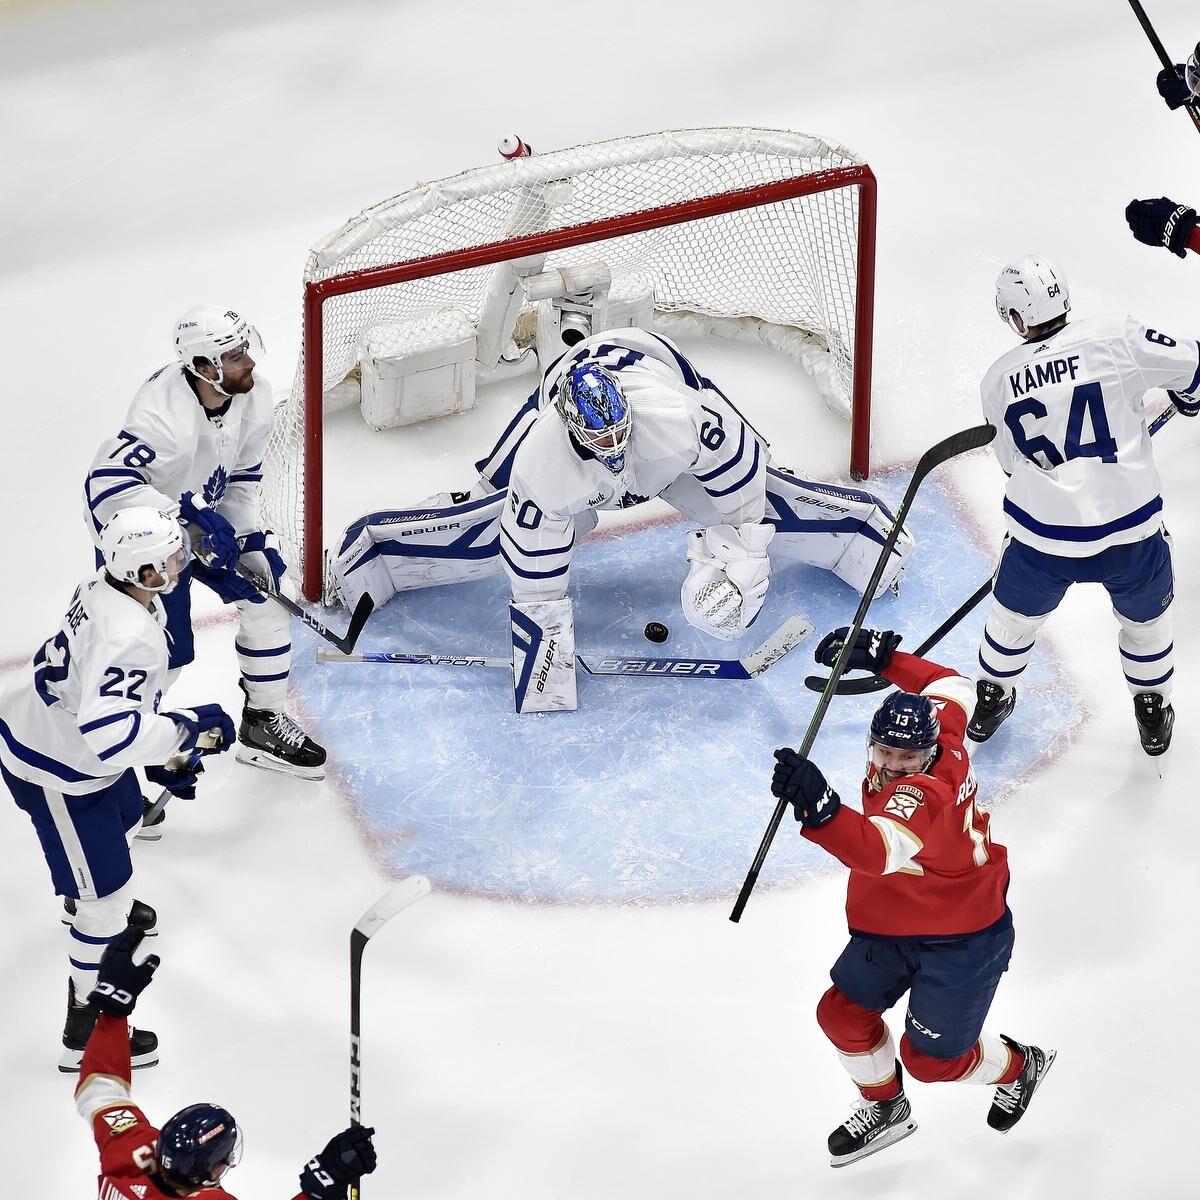 Leafs season on the brink after OT loss to Panthers in Game 3